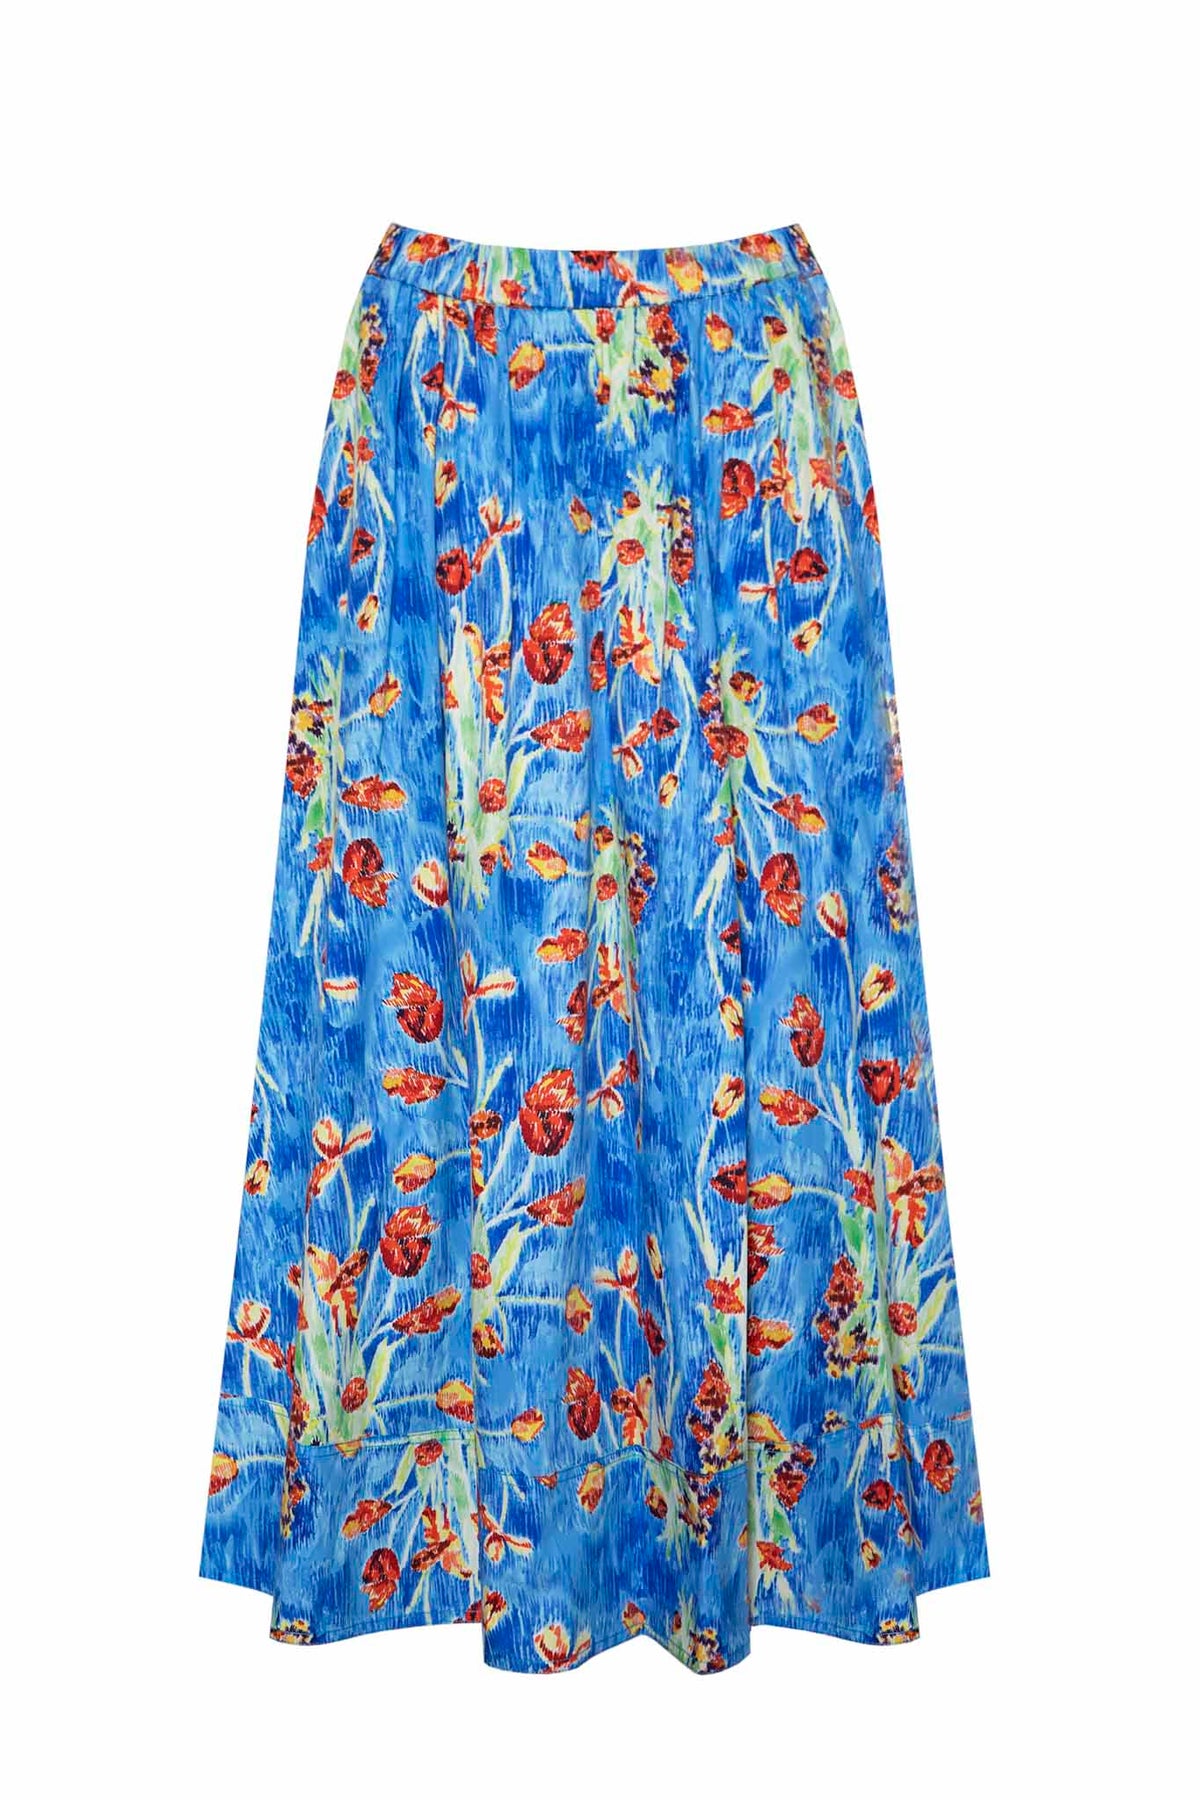 The Tatum midi skirt has a covered elastic waist and relaxed fit in a playful summer print.